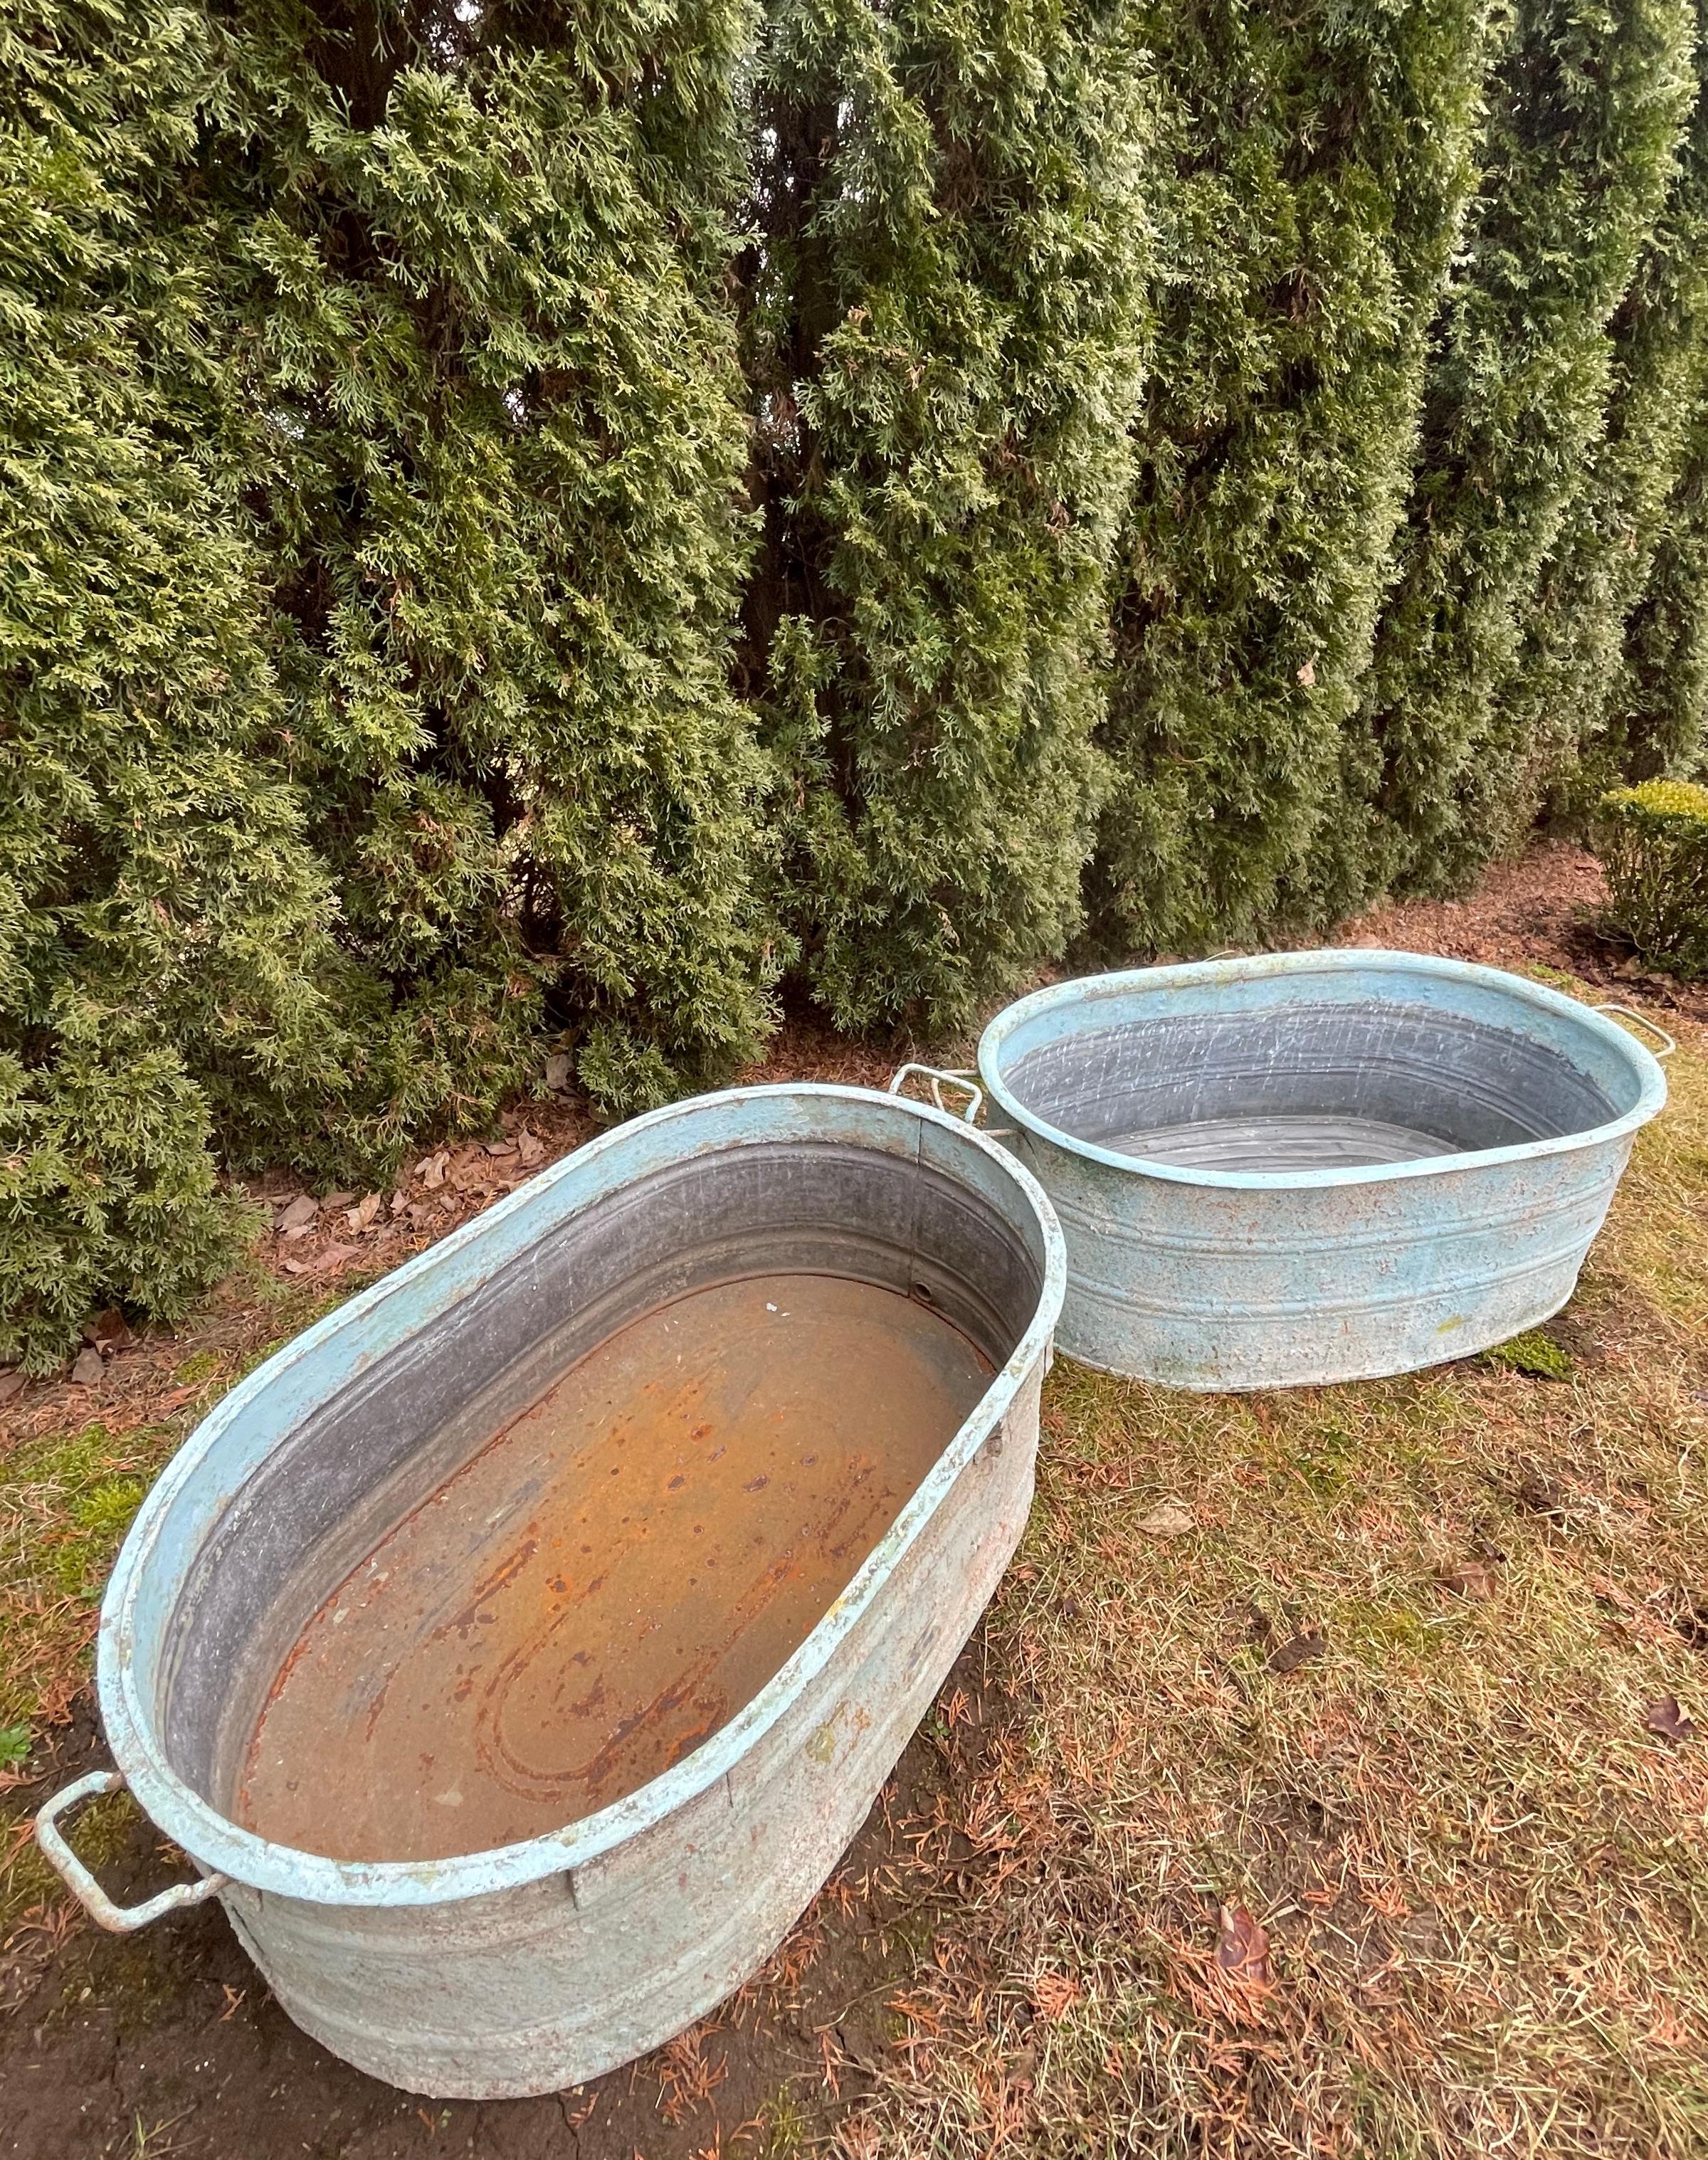 Near-Pair of Very Large German Oval Galvanized Planters #2 with Custom Surface In Good Condition For Sale In Woodbury, CT